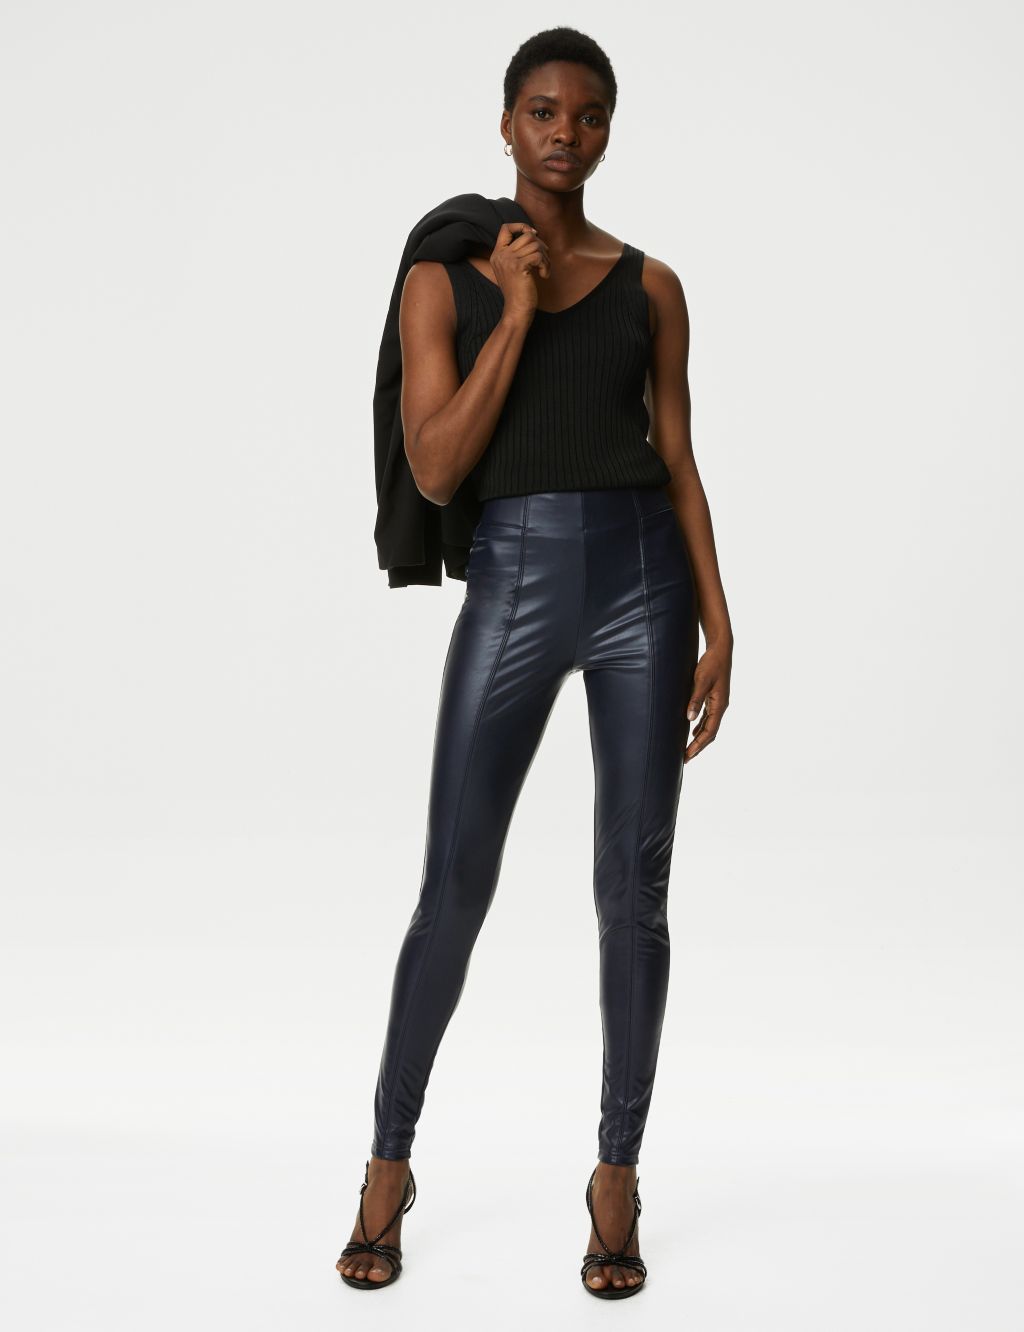 Leather Look High Waisted Leggings image 1